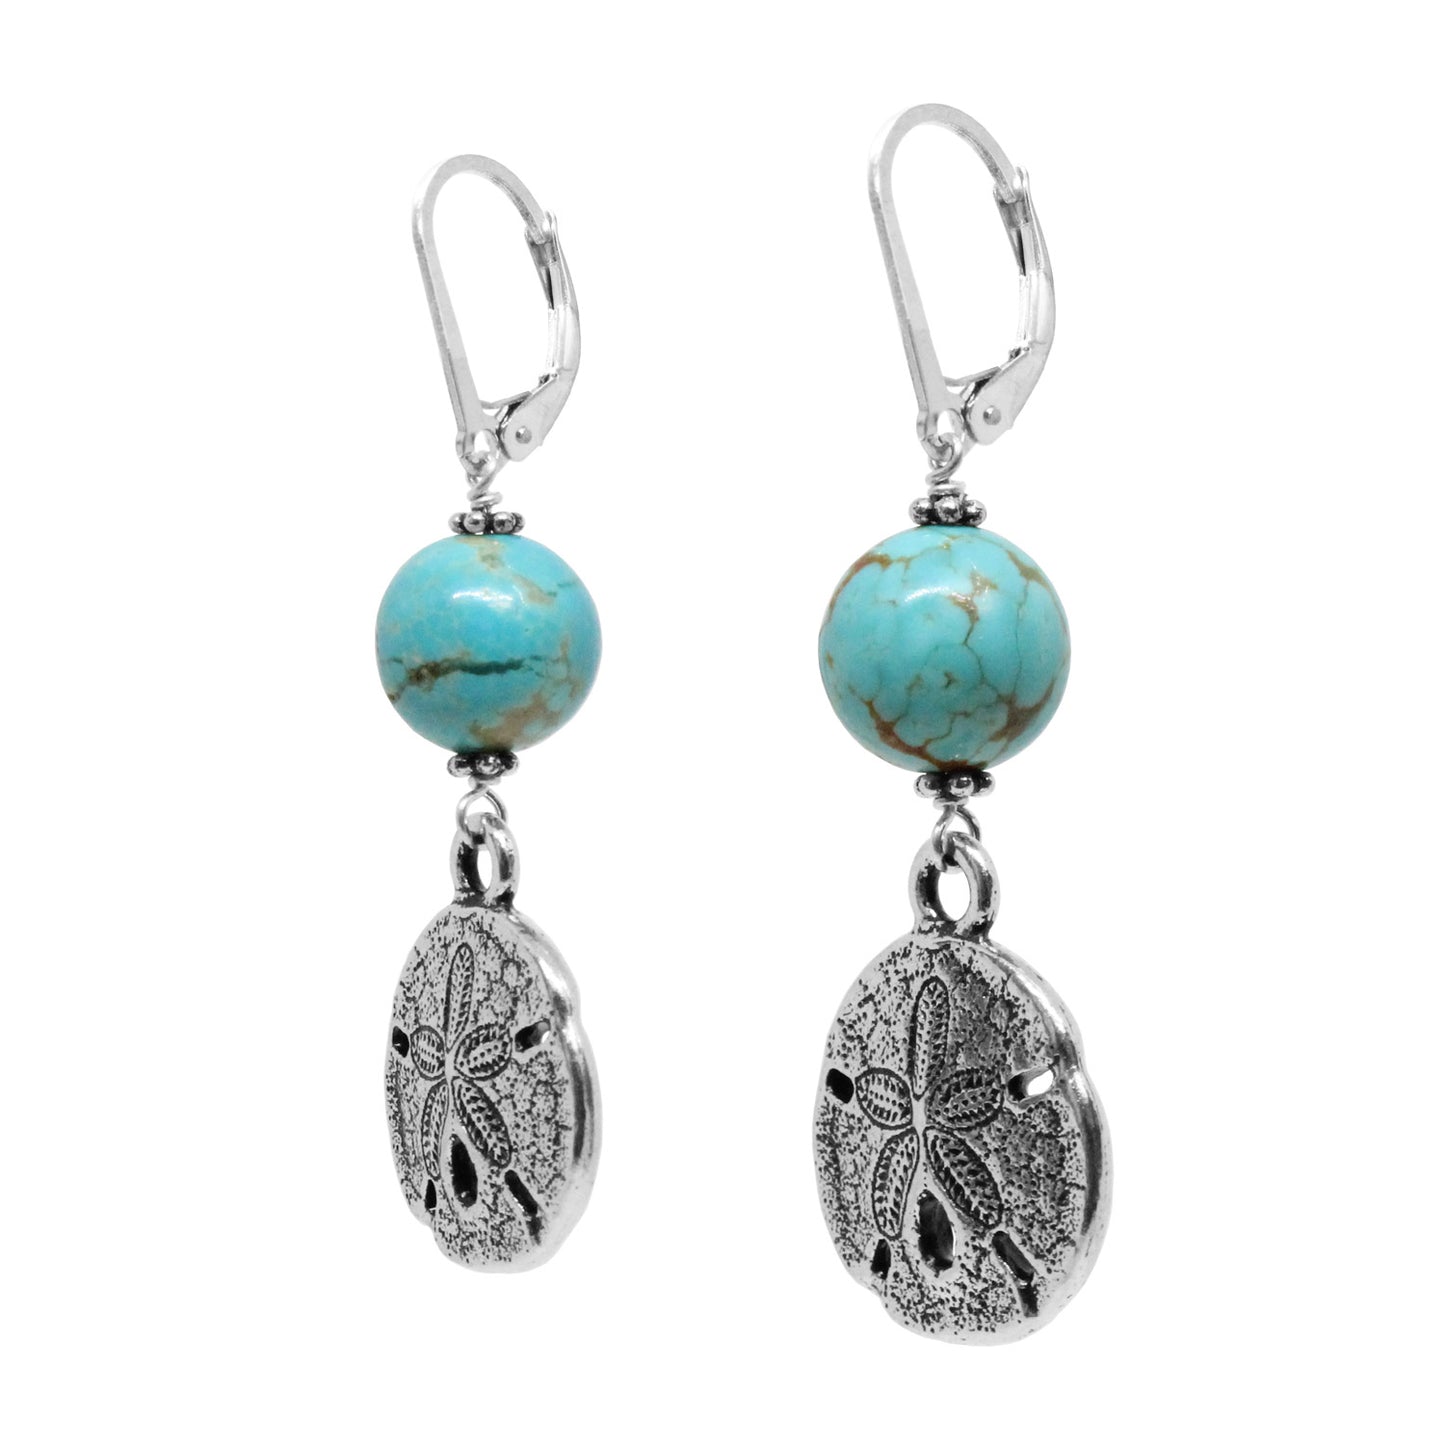 Turquoise Island Sand Dollar Earrings / 50mm length / genuine turquoise gemstones / sterling silver leverback earwires